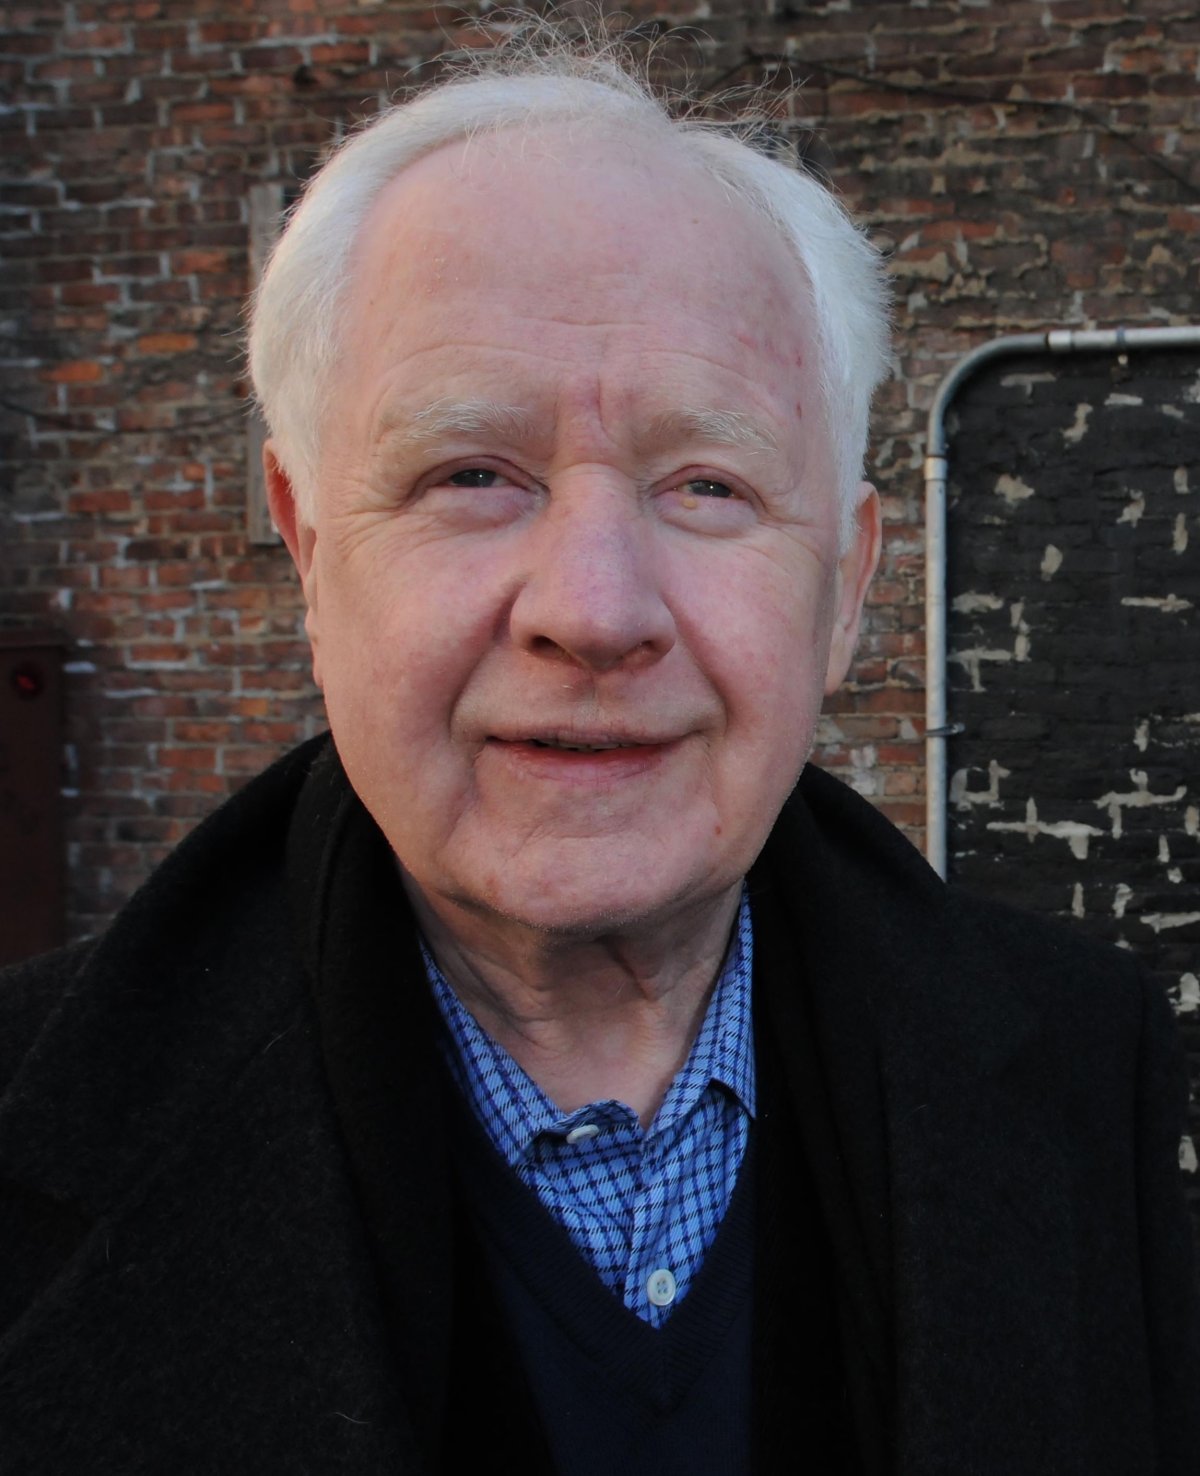 Alphie McCourt in 2009 on Eighth Ave. at W. 26th St. File photo